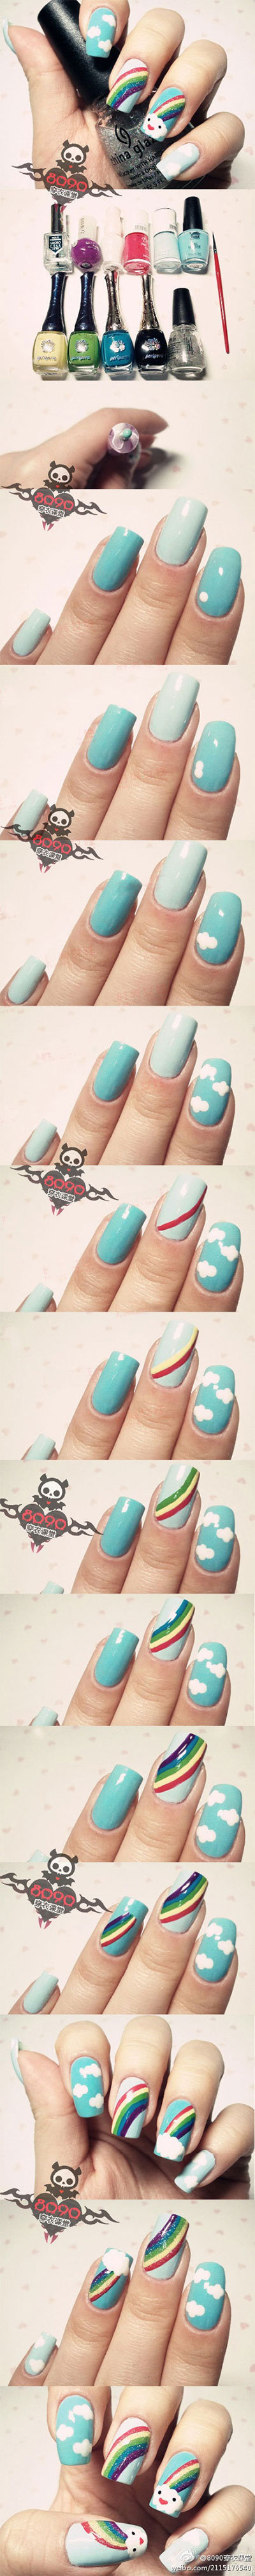 Nail-Art-Tutorials-Step-By-Step-For-Beginners-Learners-2013-2014-1